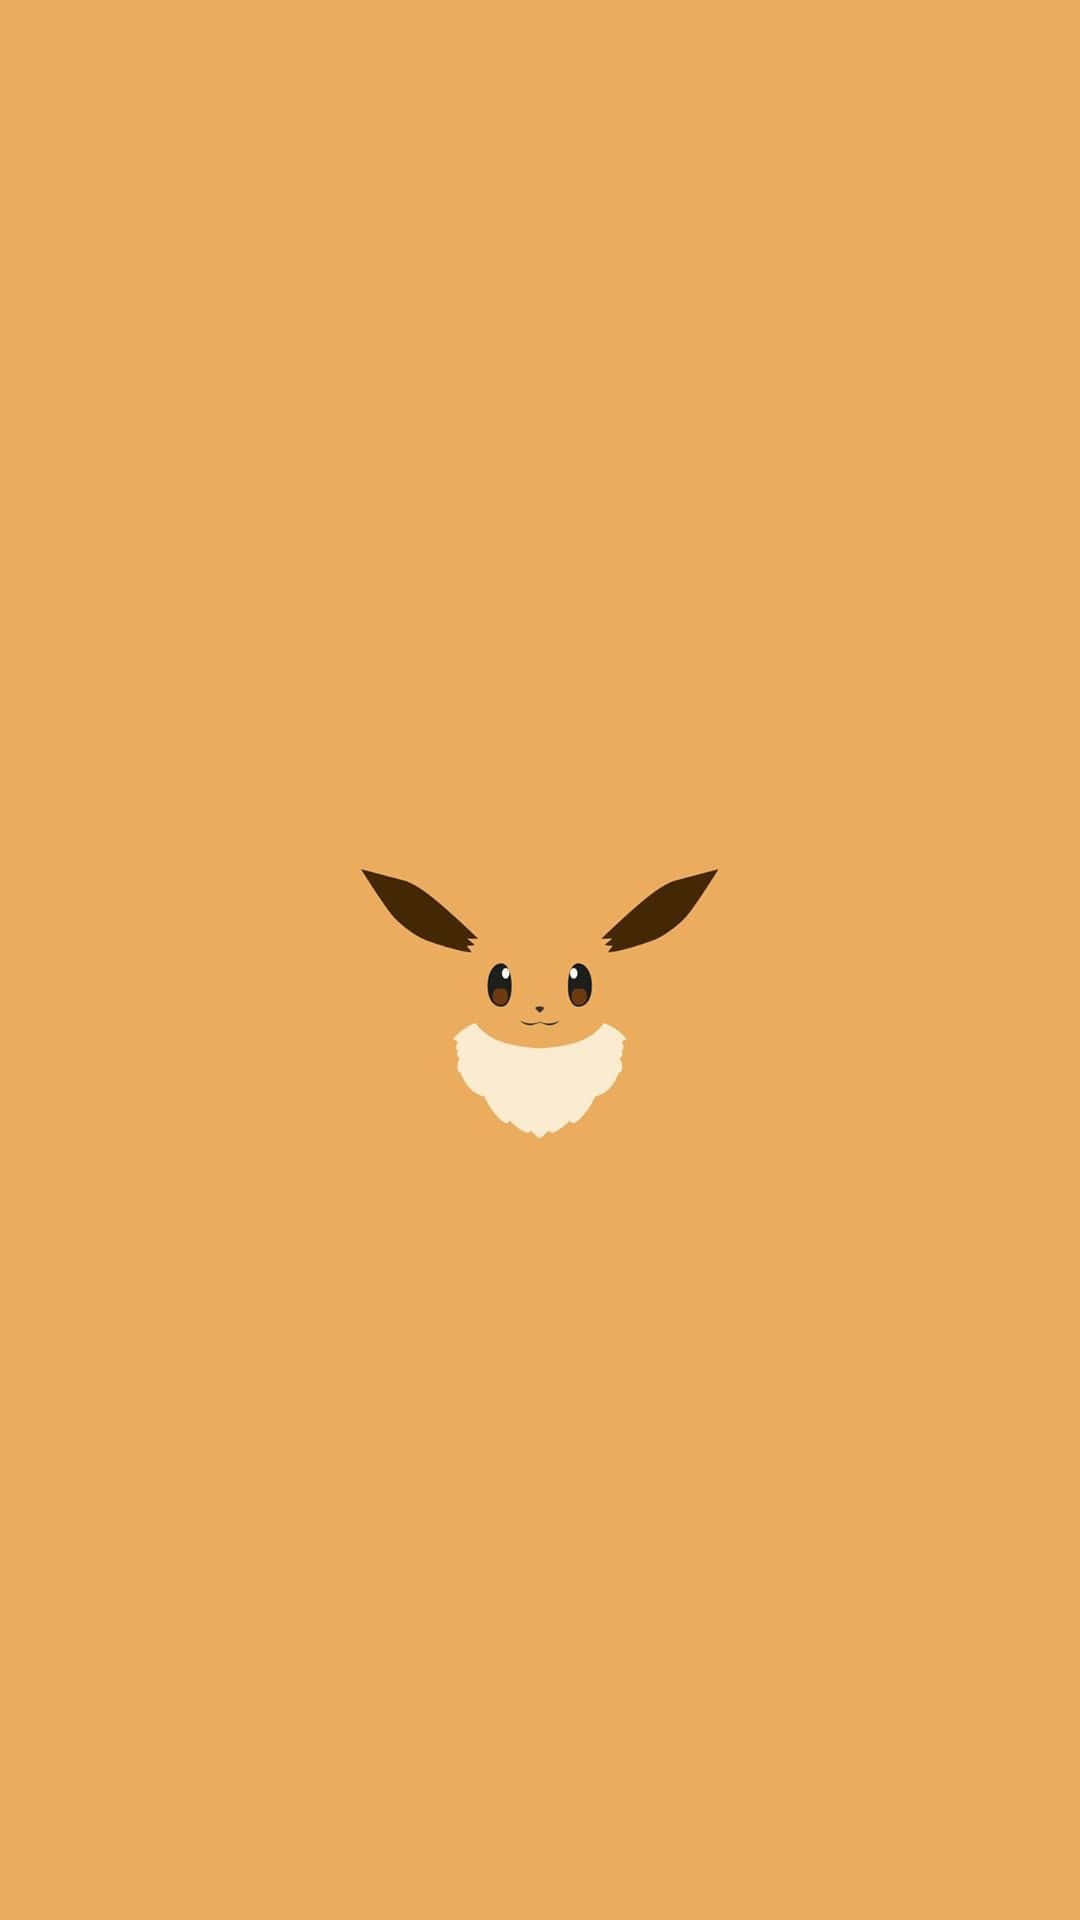 Exciting Journey with Iconic Pokémon Characters Wallpaper